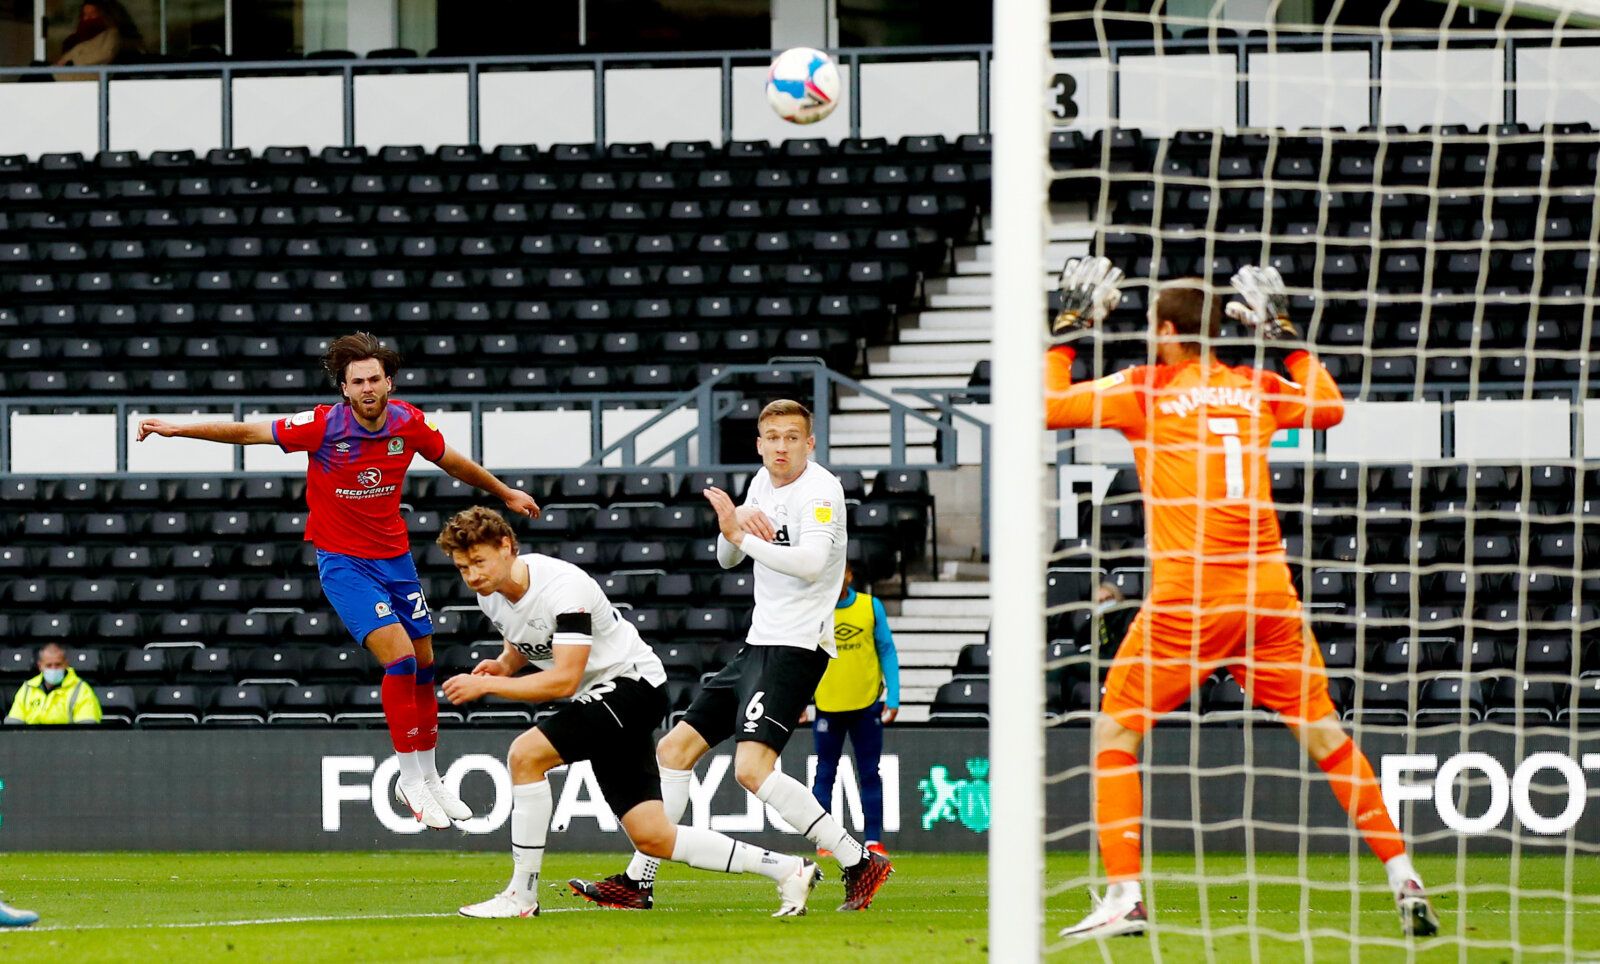 Soccer Football - Championship - Derby County v Blackburn Rovers - Pride Park, Derby, Britain - September 26, 2020  Blackburn Rovers' Ben Brereton shoots at goal   Action Images/Jason Cairnduff  EDITORIAL USE ONLY. No use with unauthorized audio, video, data, fixture lists, club/league logos or 